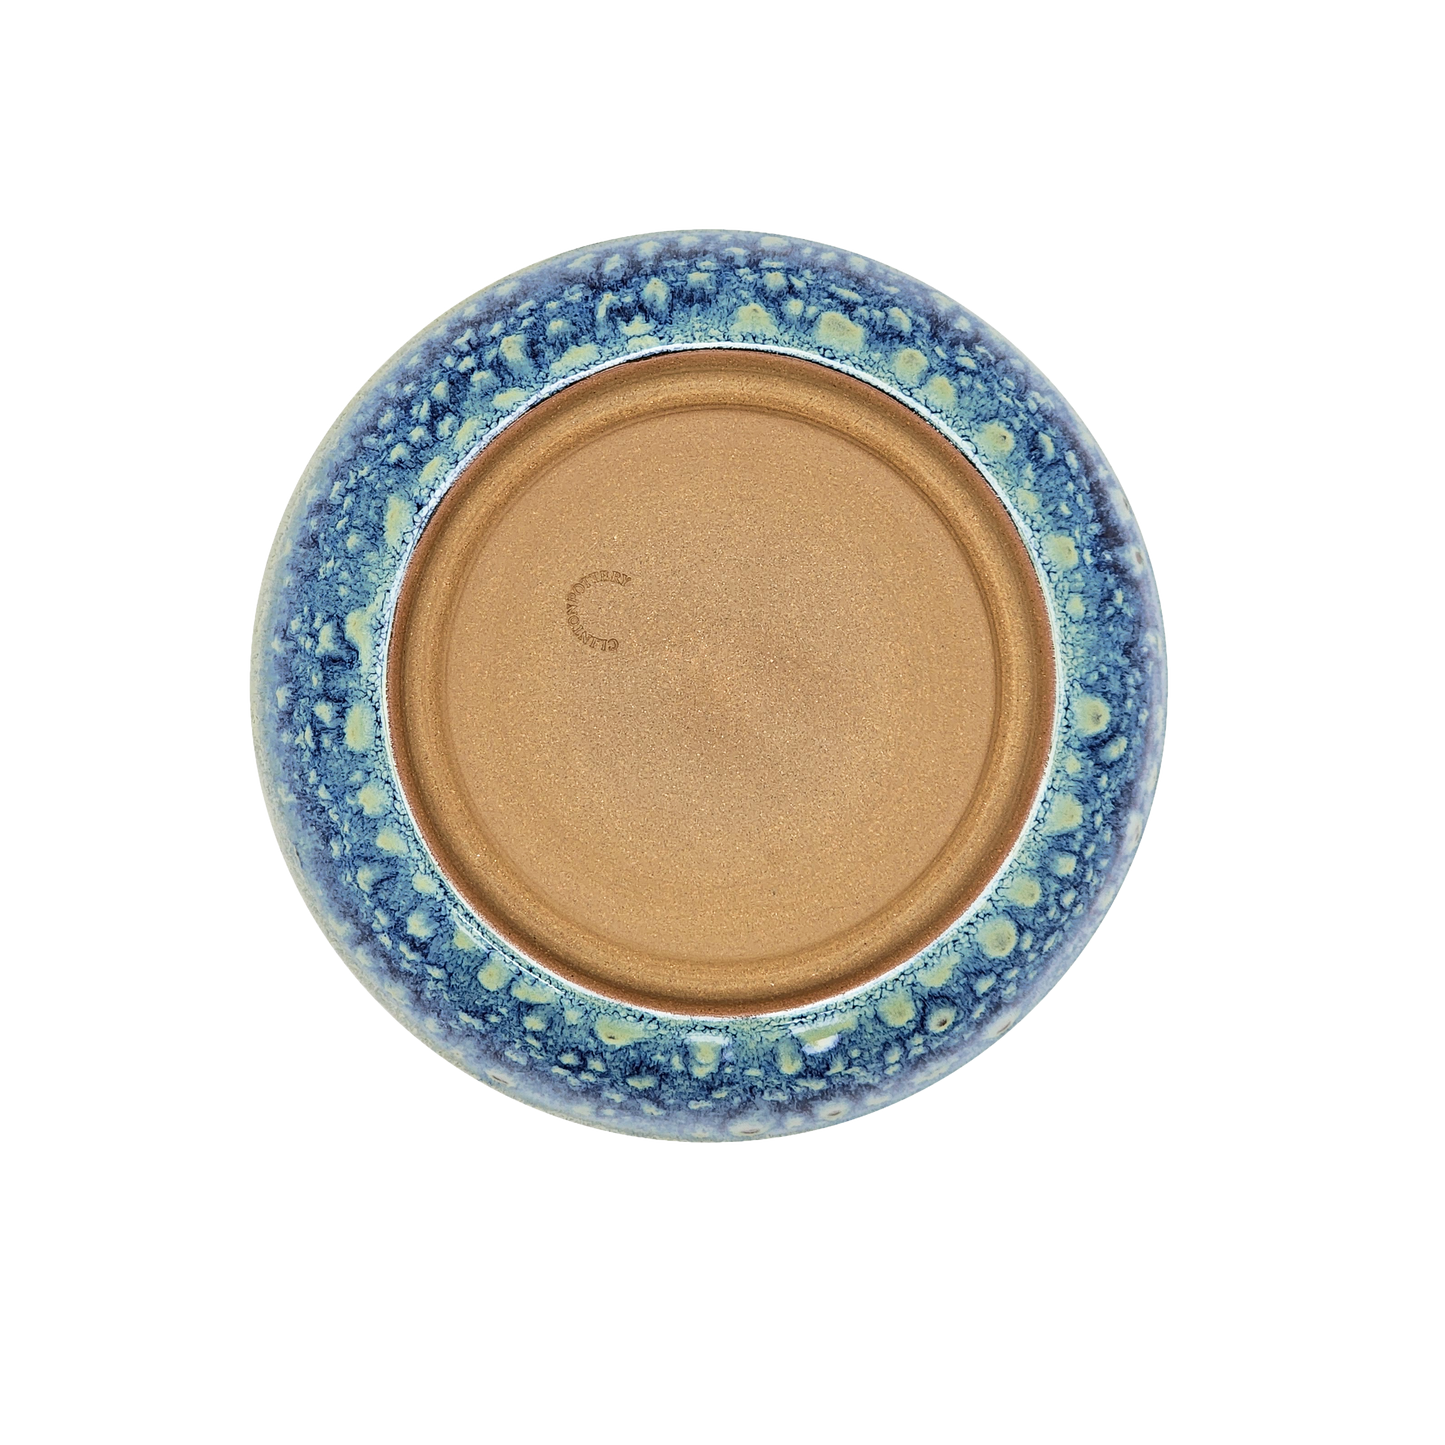  Image Description: A large pasta dish in the "Starry Night" glaze, crafted by Clinton Pottery. With a diameter of 10 inches, this dish features a captivating design reminiscent of a midnight sky filled with twinkling stars. Ideal for serving generous portions of pasta or other delectable meals, adding an elegant touch to any dining experience.